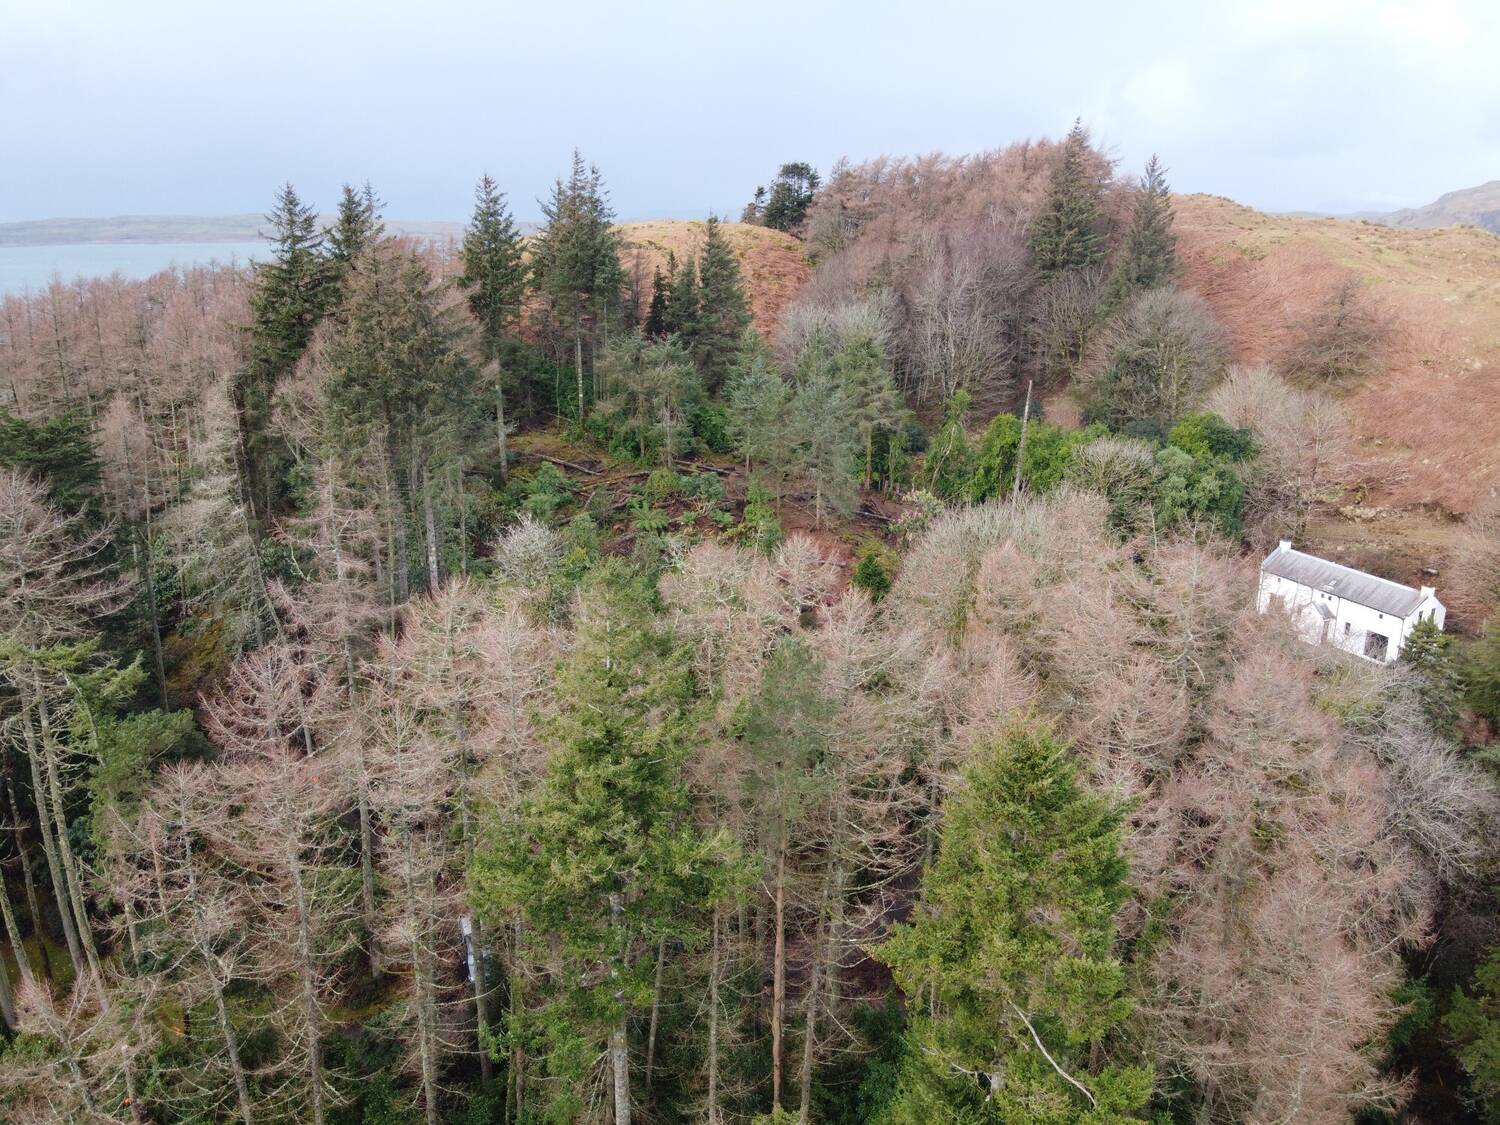 Aerail view of a woodland with dying trees and some green trees